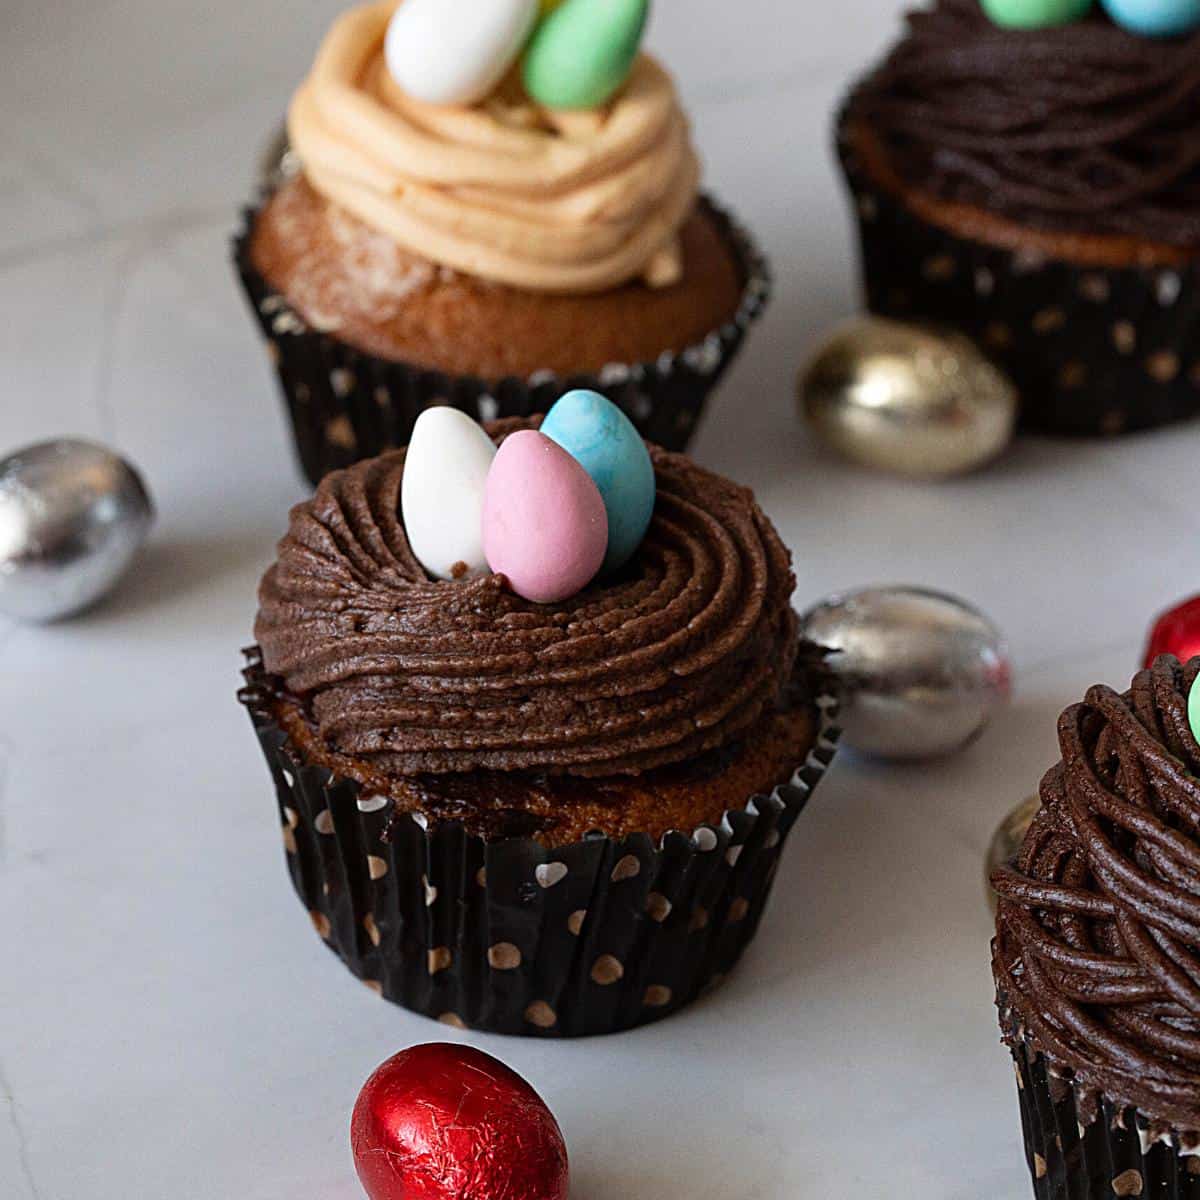 A coconut cupcake with frosted candy eggs.